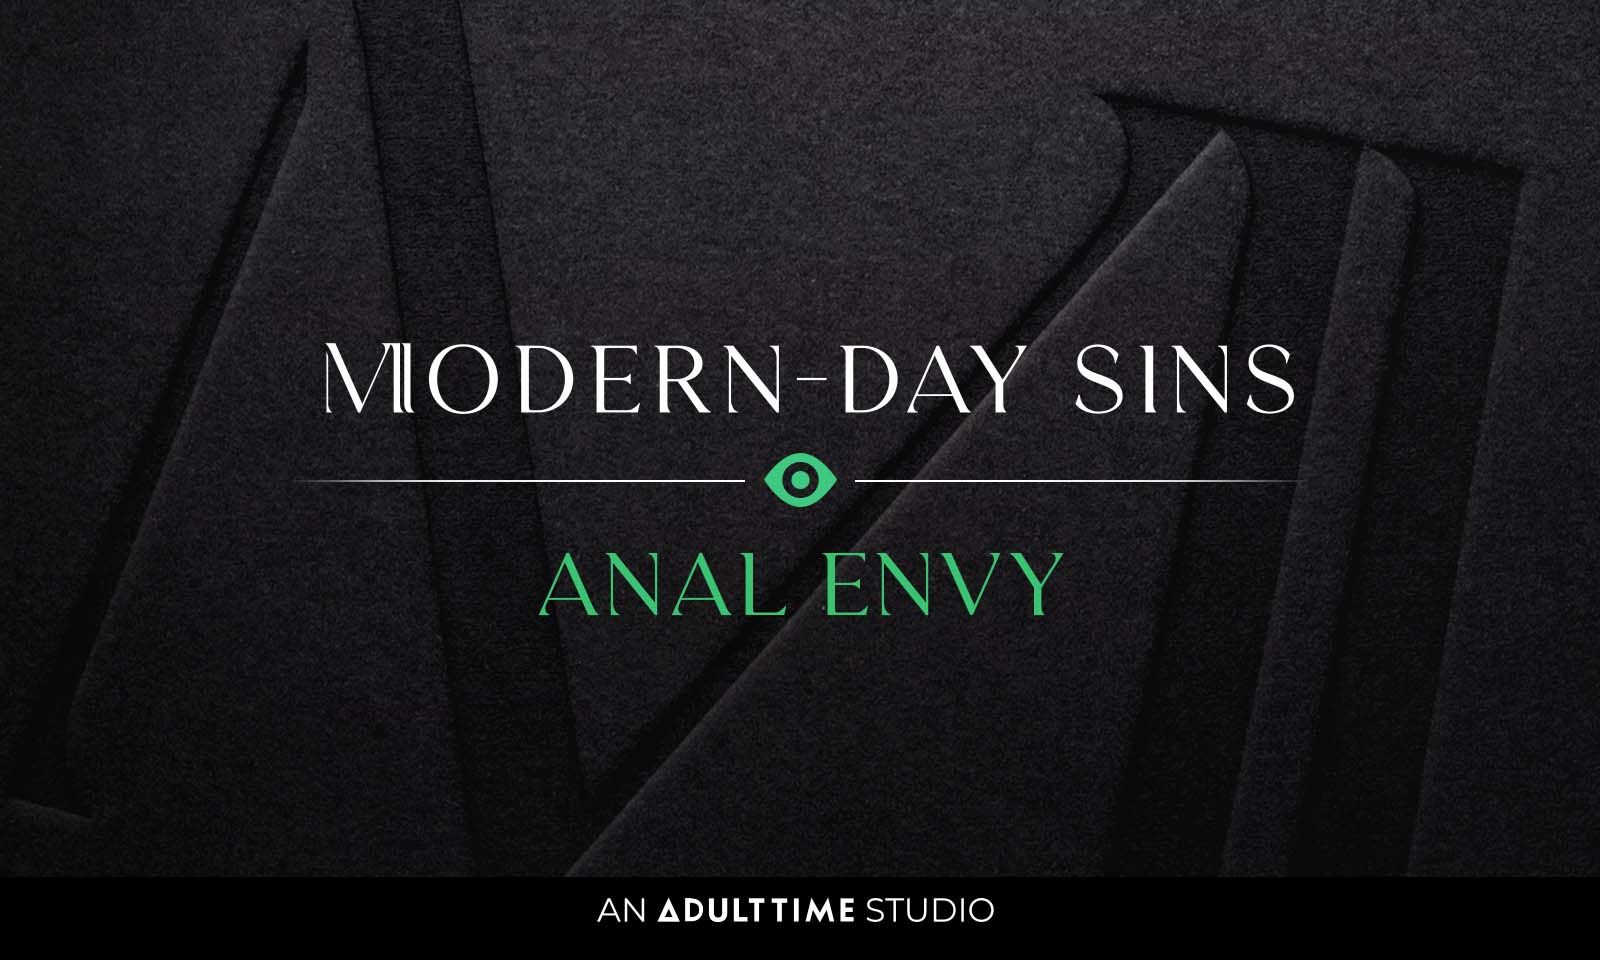 Modern-Day Sins Unleashes Last Series Preview, 'Anal Envy'